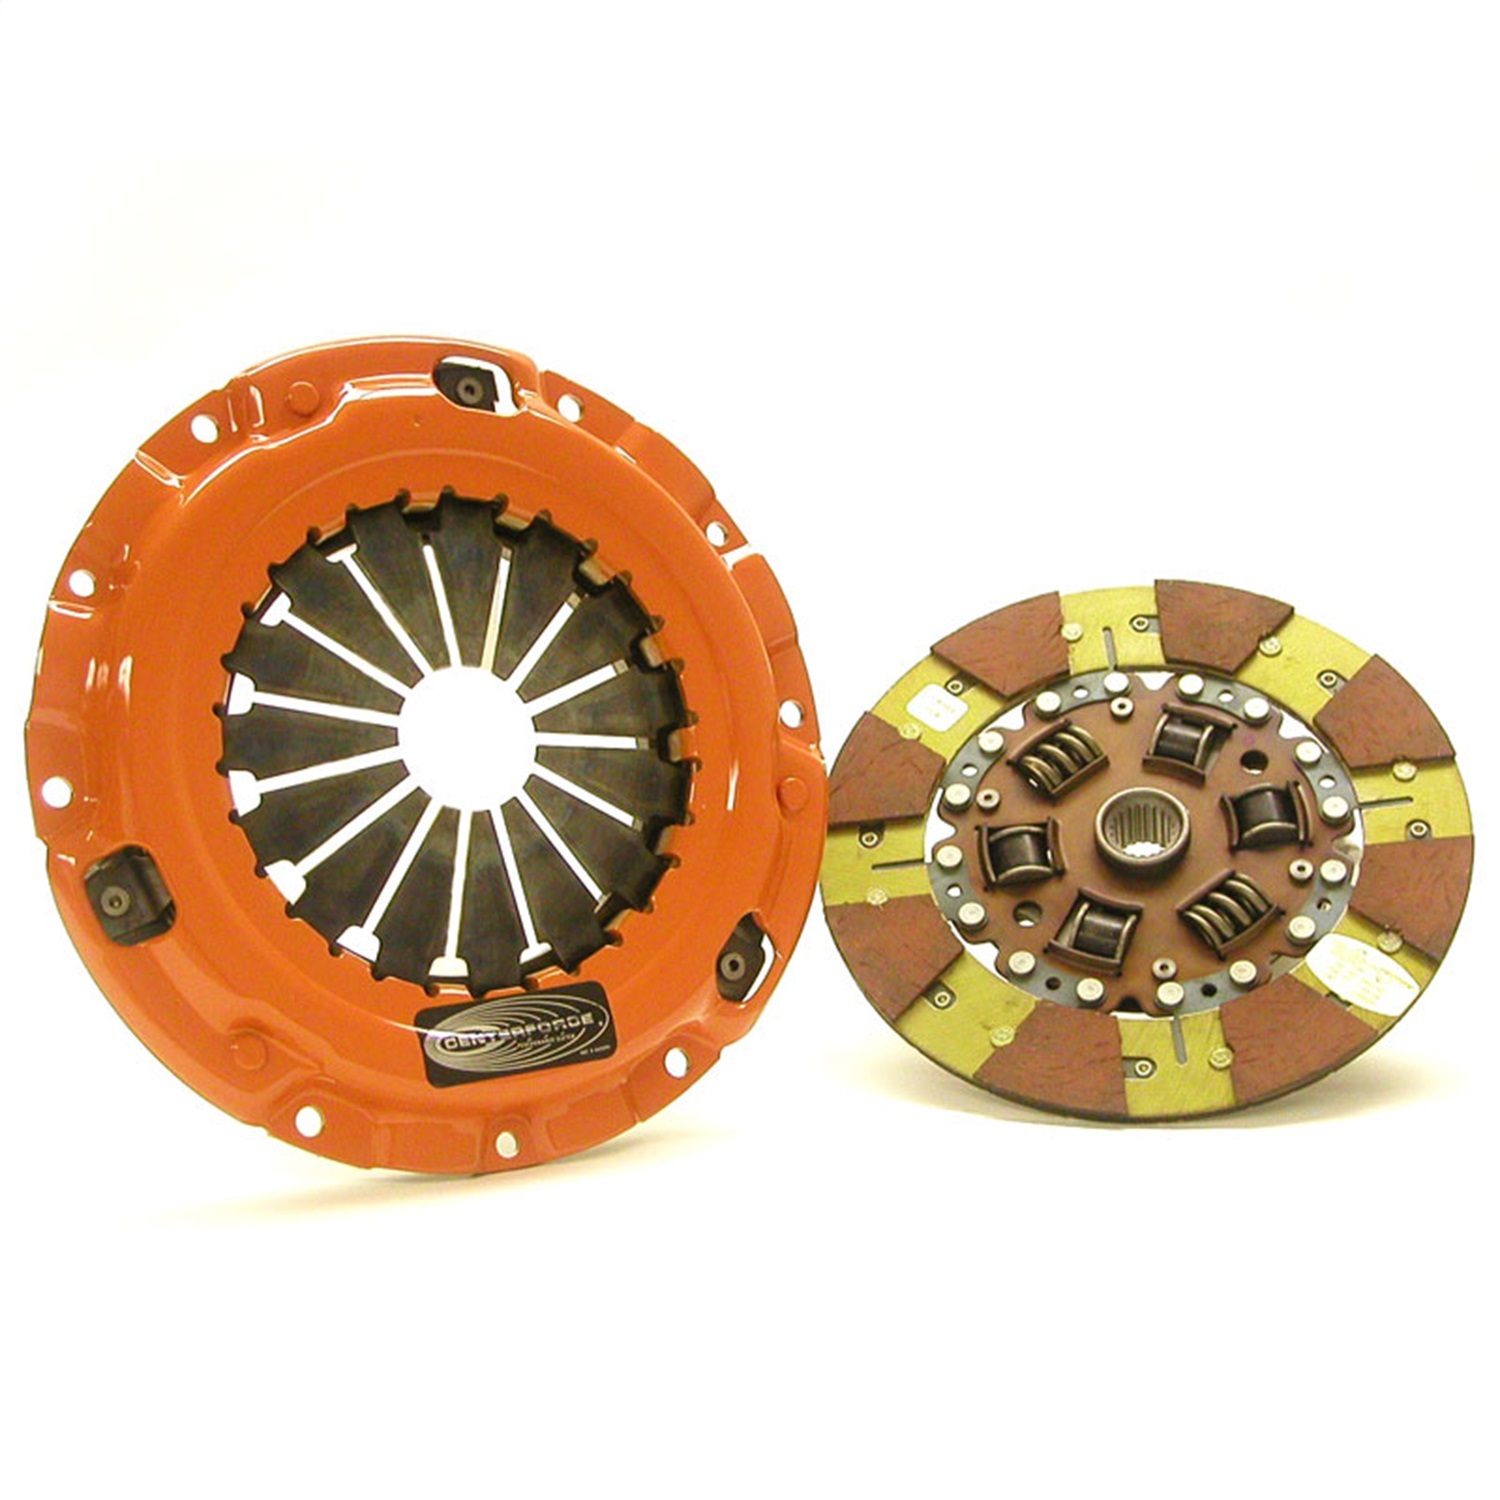 Centerforce Centerforce DF536010 Dual Friction Clutch Pressure Plate And Disc Set